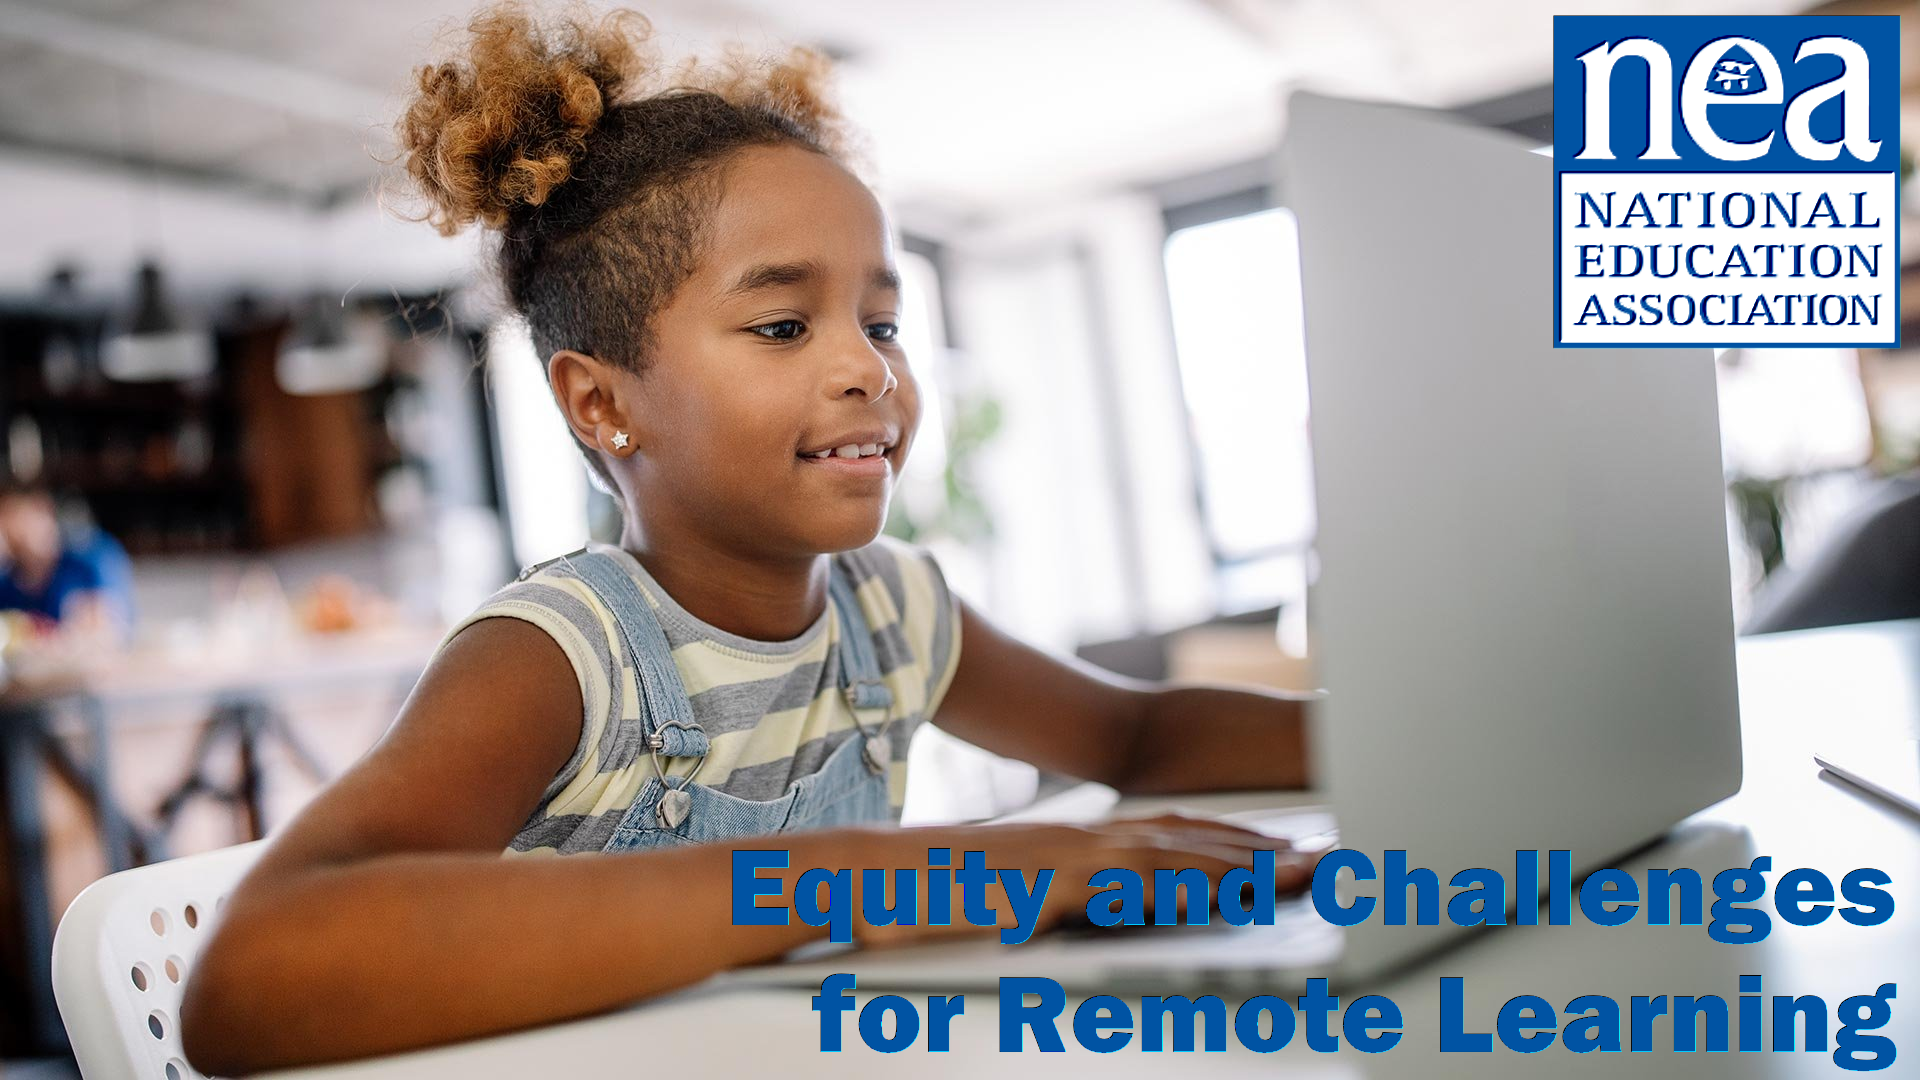 NEA's Equity and Challenges for Remote Learning